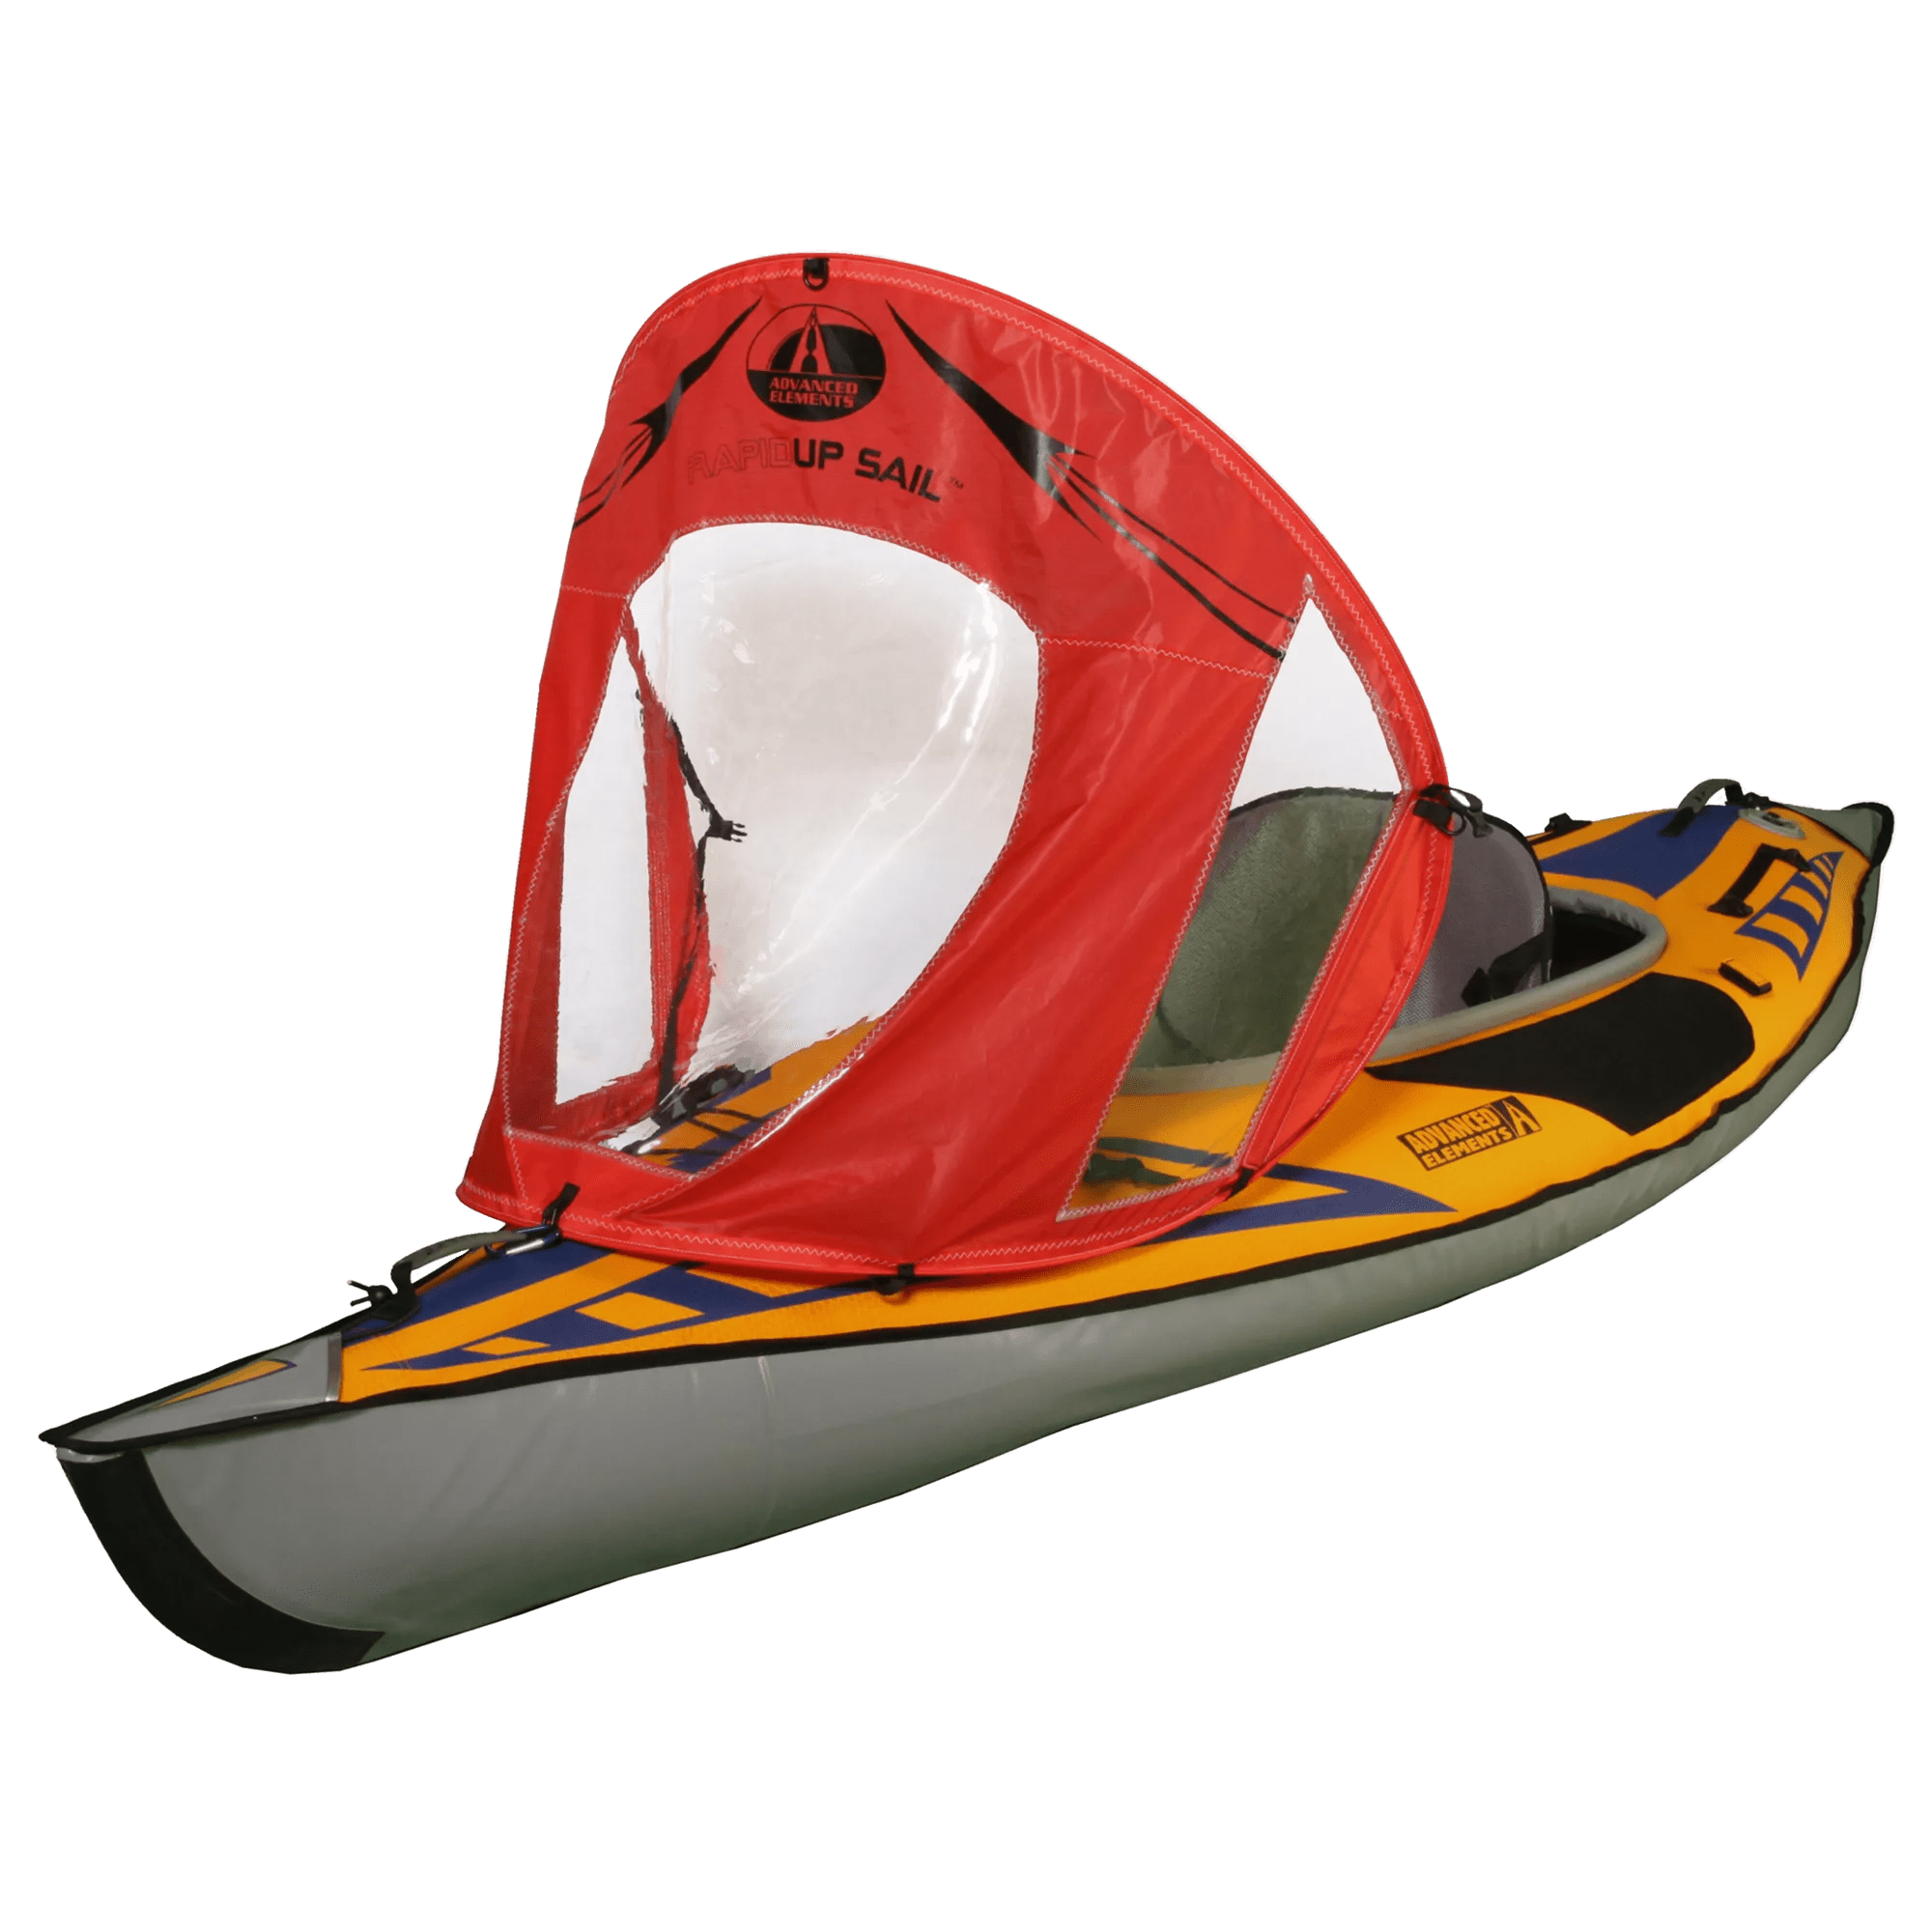 ADVANCED ELEMENTS - Voile de kayak Rapidup - Red - AE2040 - ISO 